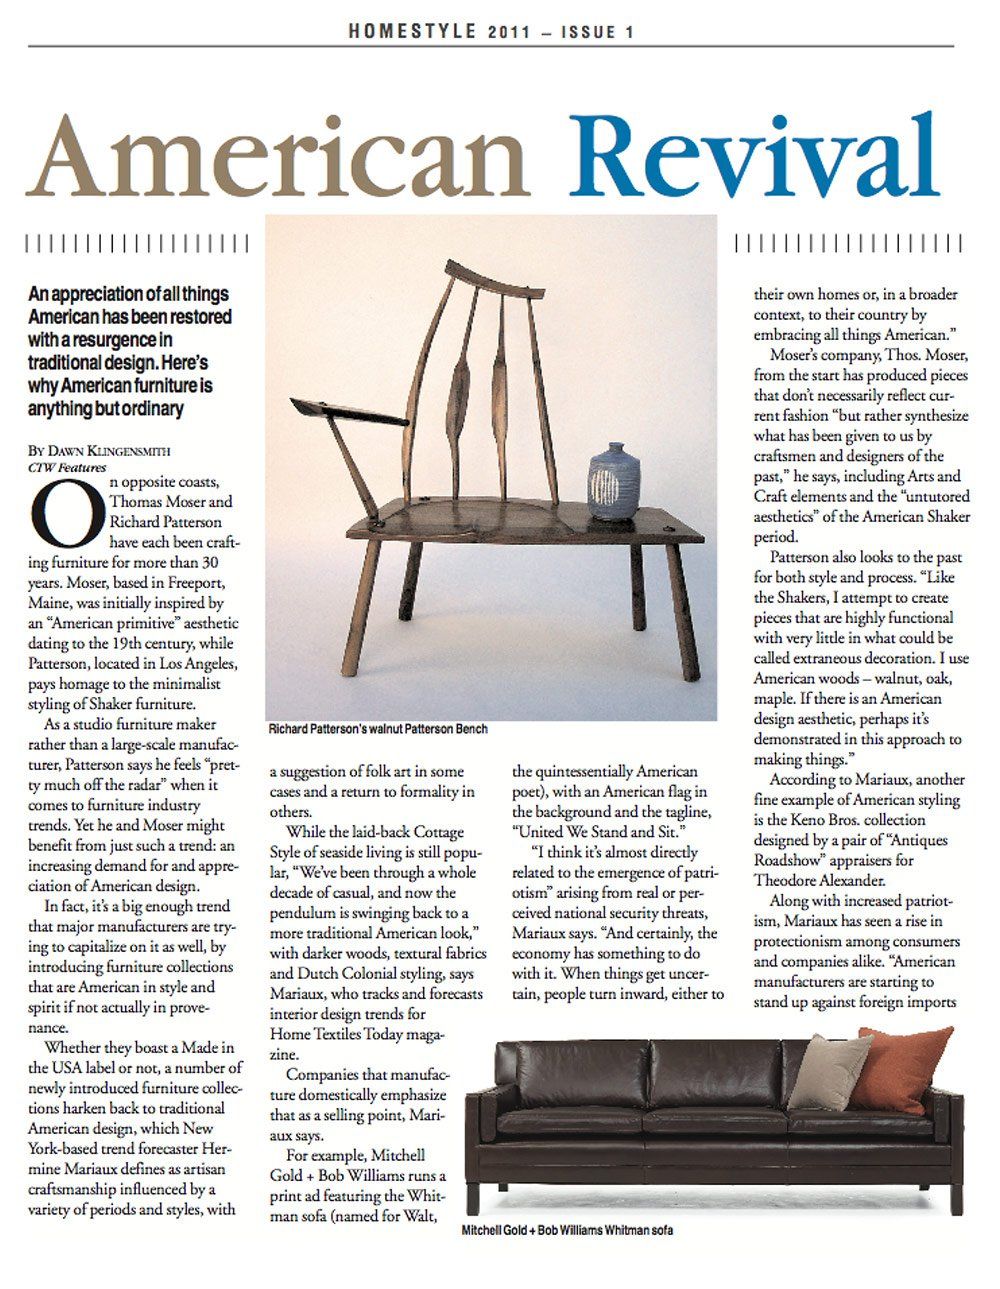 Home Style: American Revival